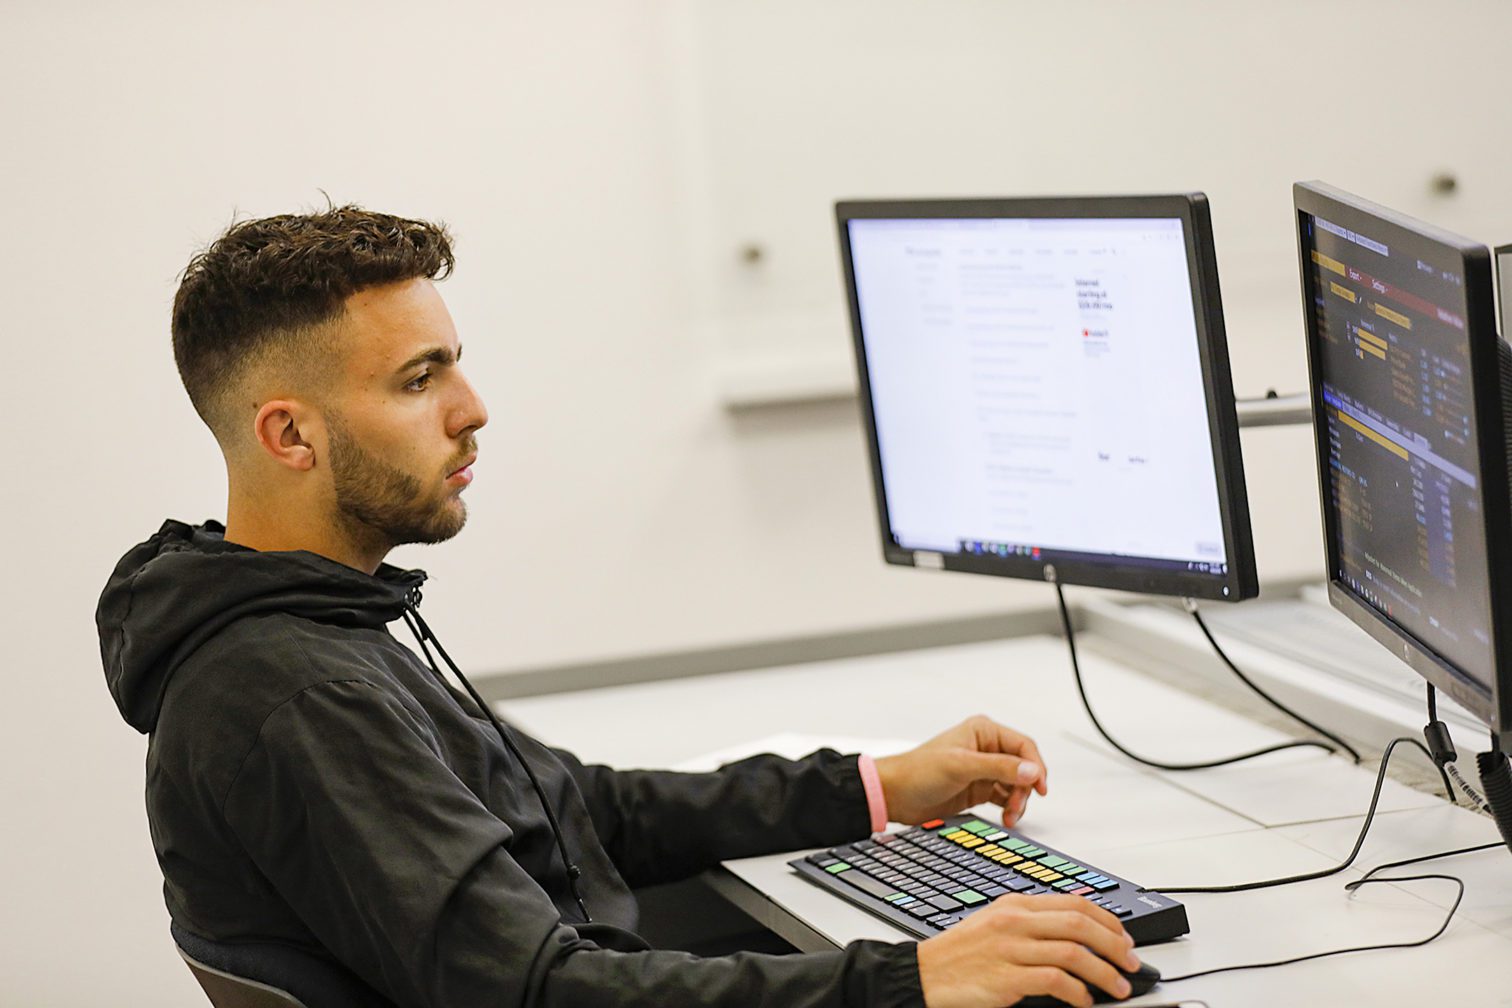 A male student sitting in front of a computer and holding the computer mouse.